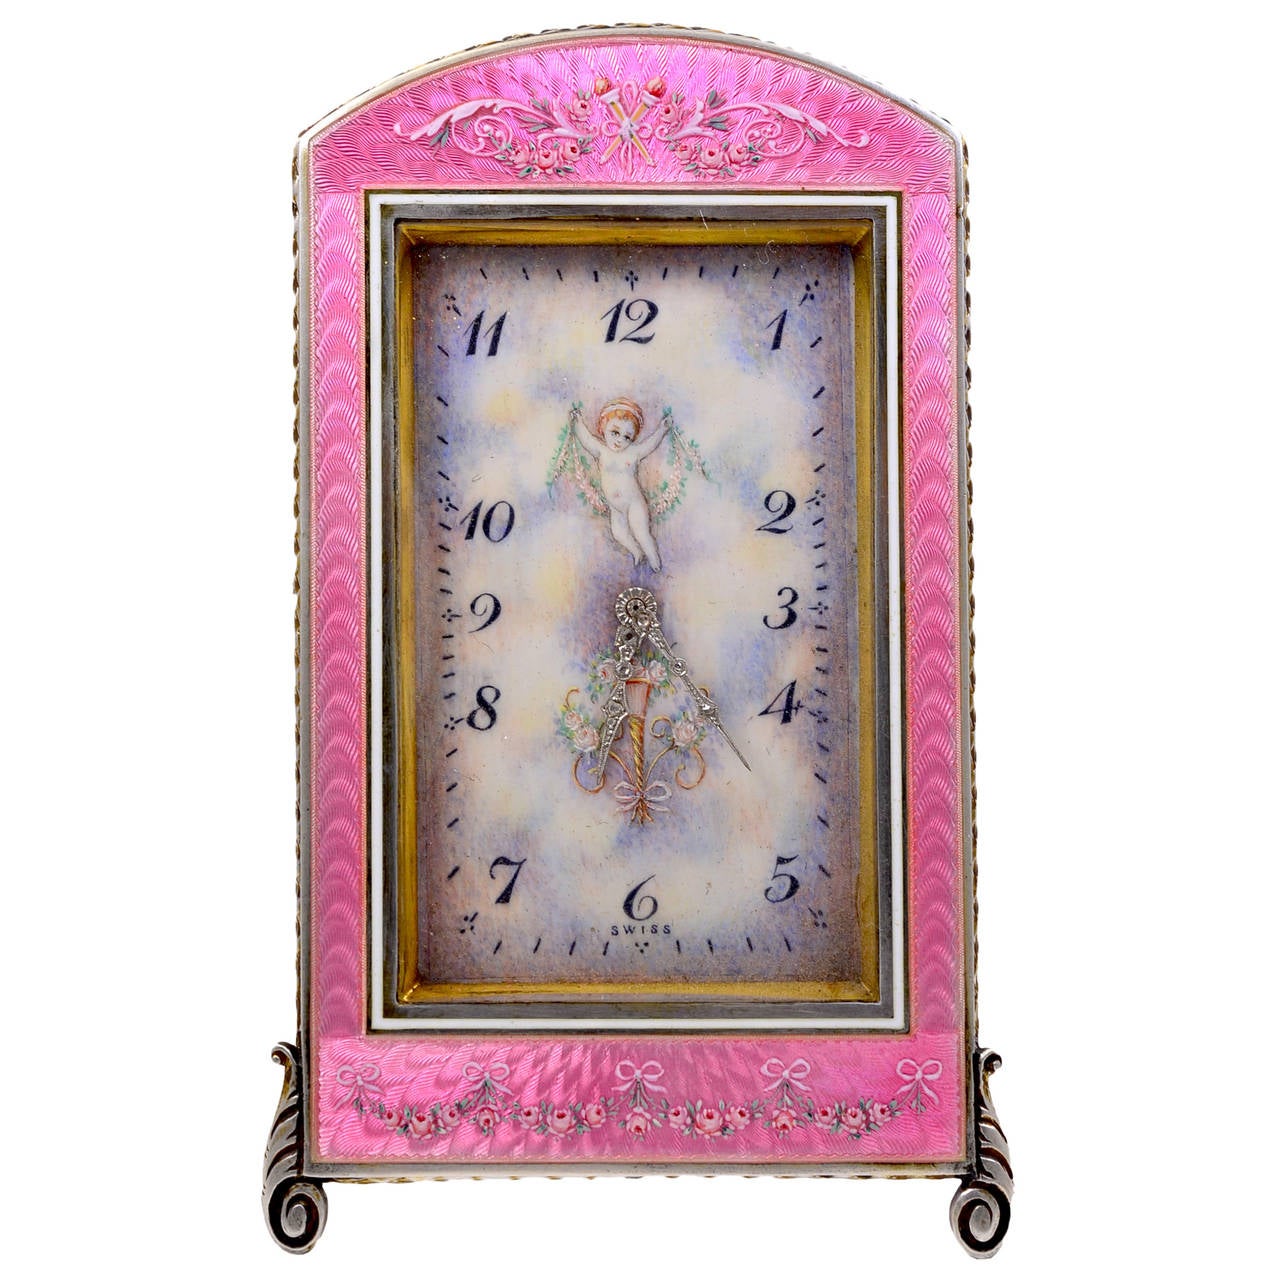 Guilloche Enamel and Sterling Antique Clock